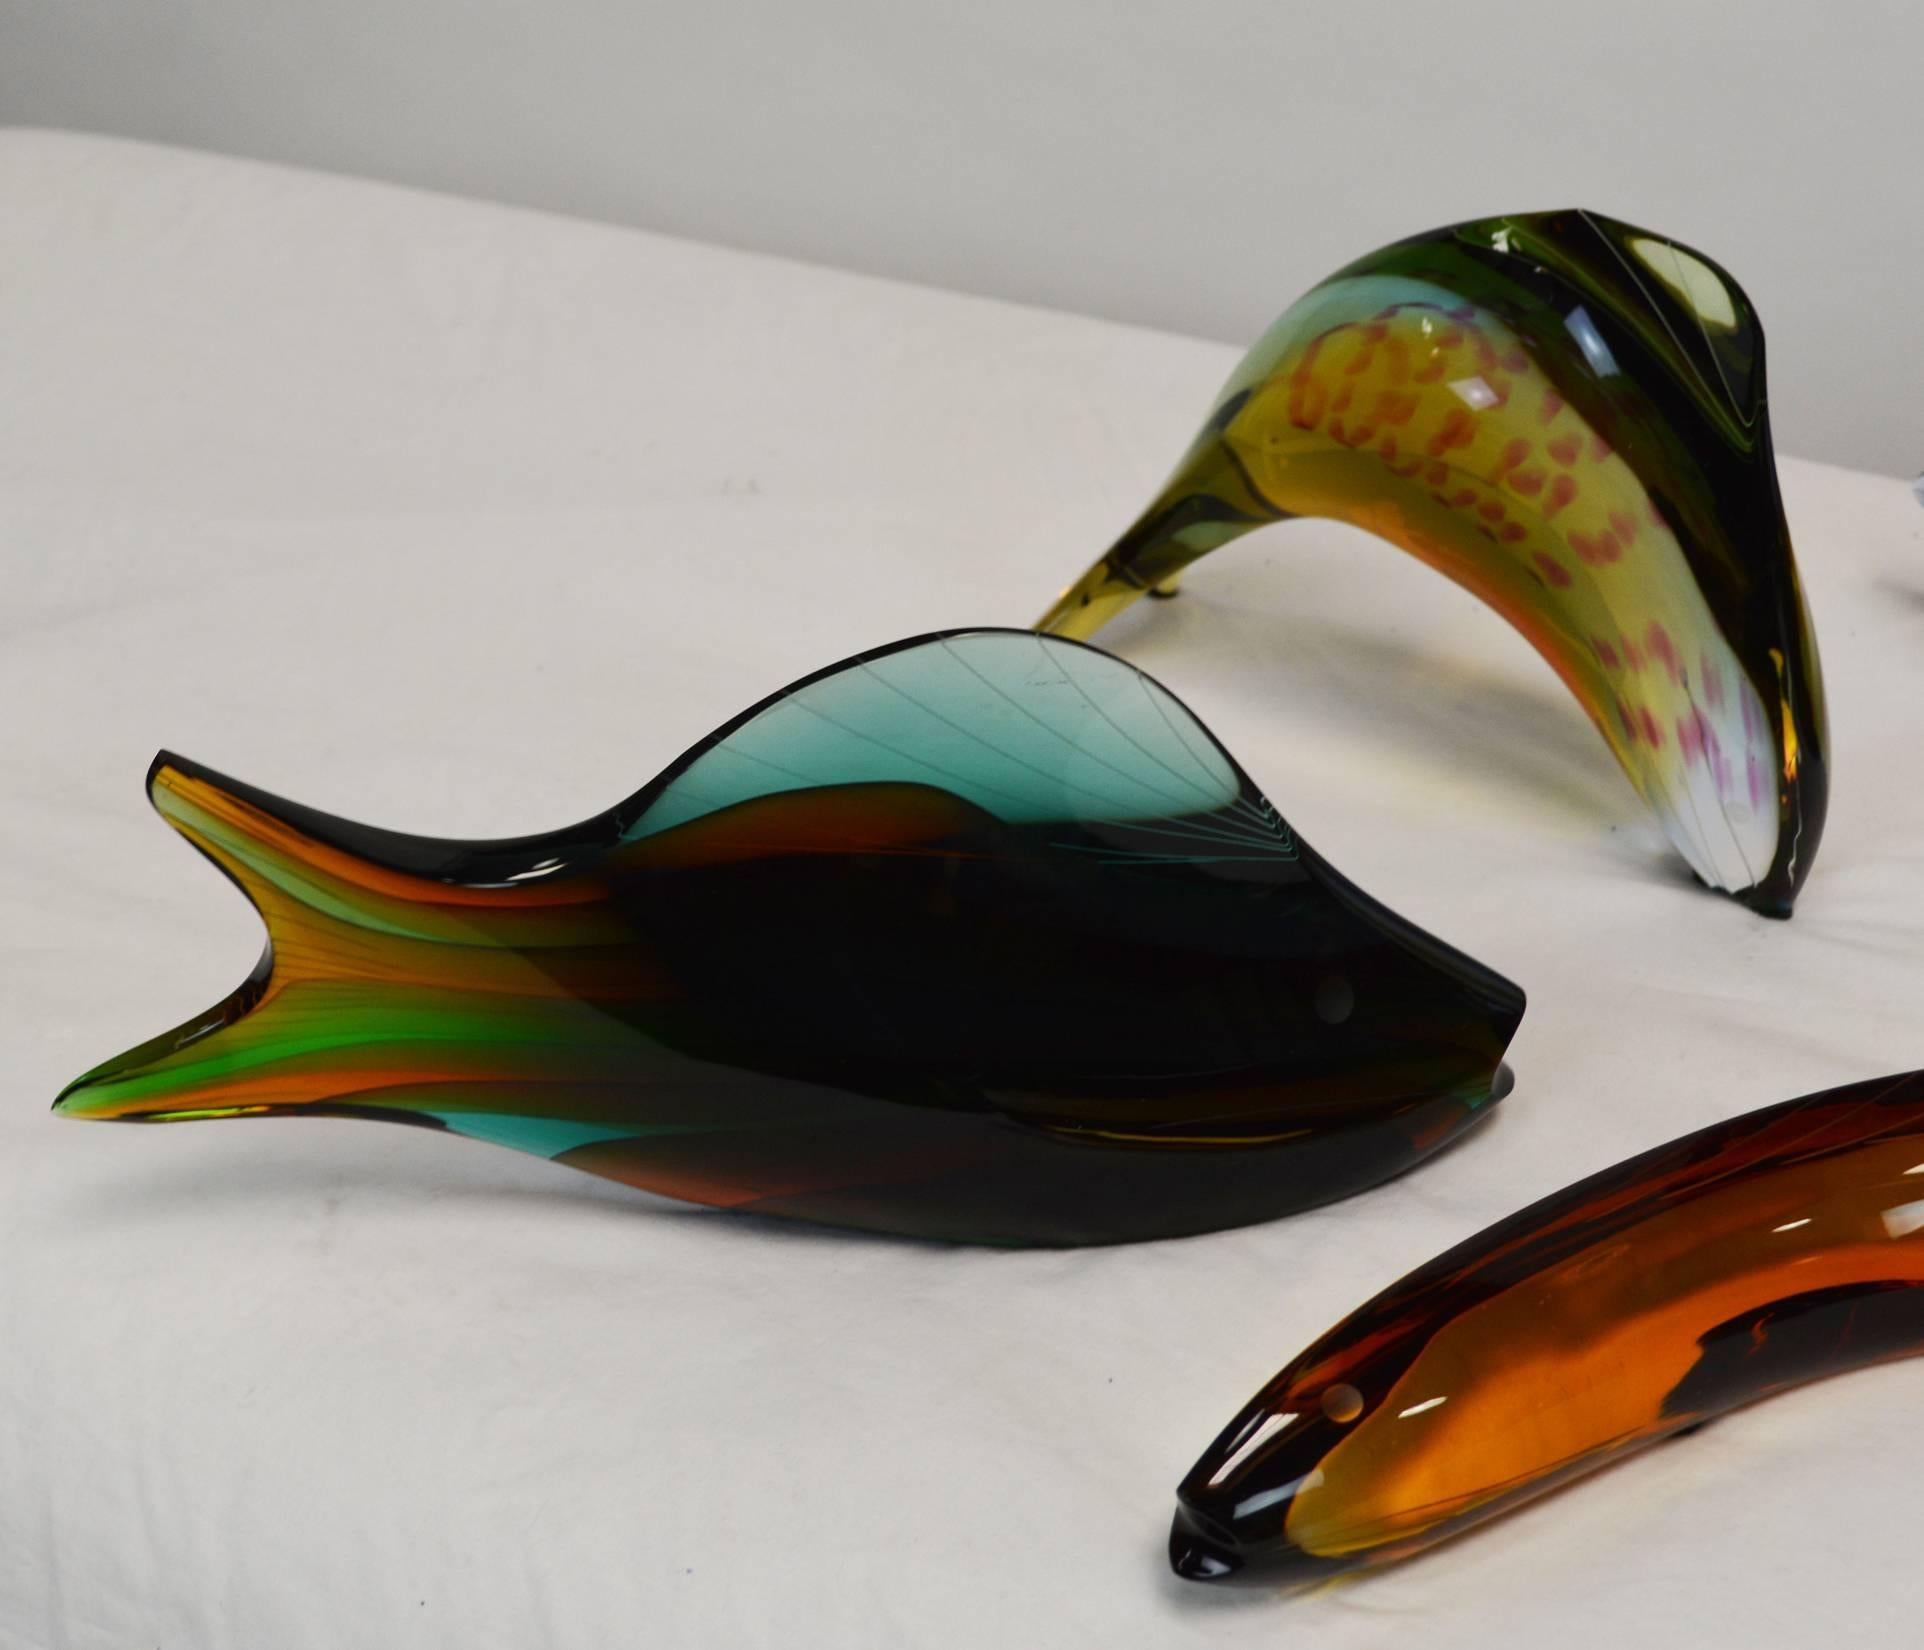 A group of six Czech glass fish by Exbor .
“...The concept for this range was devised in 1958, when Rozinek and Honzik saw fish sculptures created by Vera Liskova for Moser that were to be included in the World Exposition in Brussels. Rozinek, a